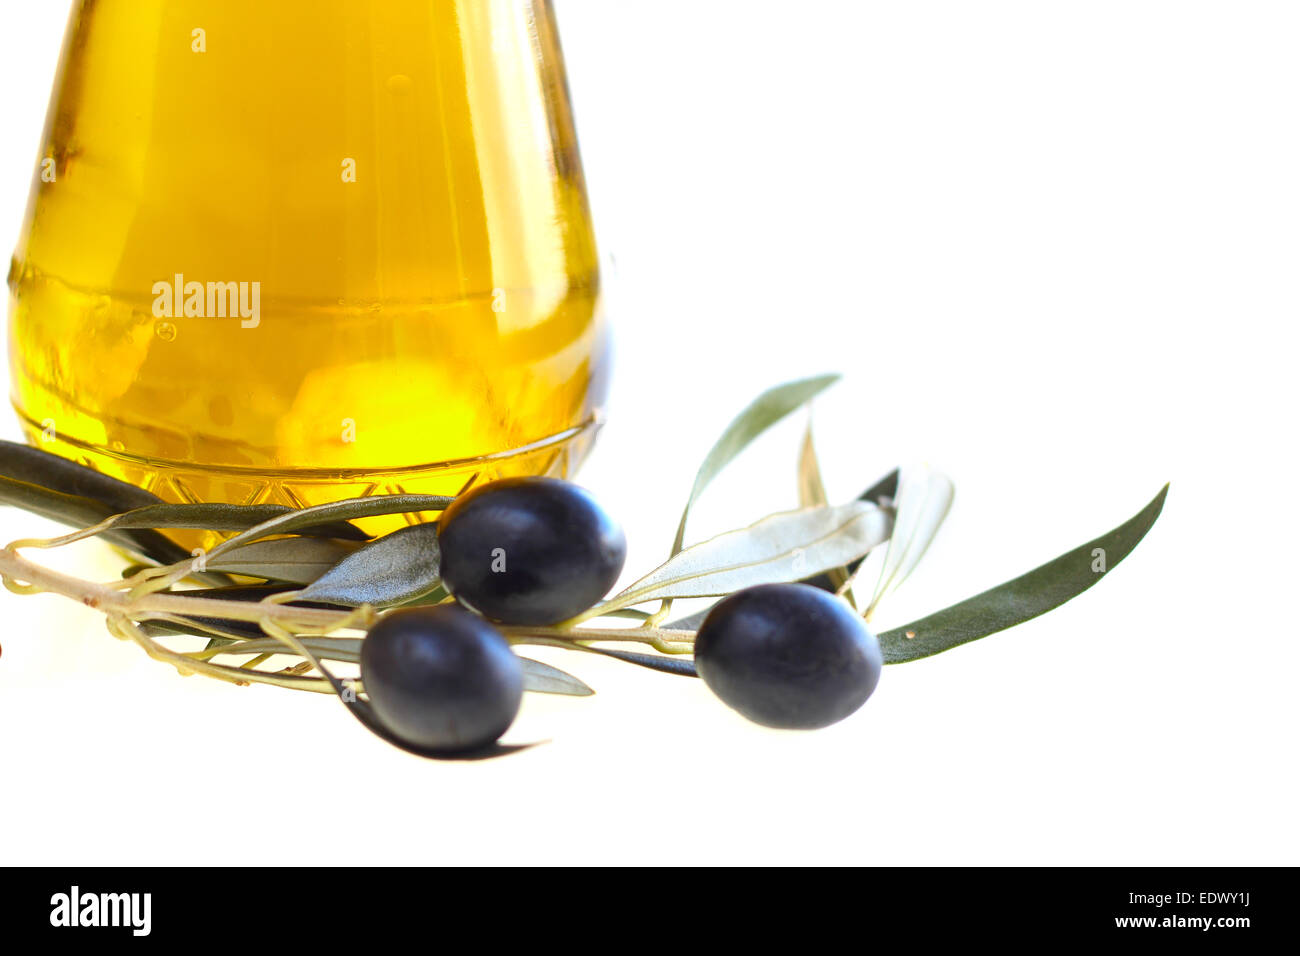 Bottle of olive oil and black olives isolated on white background Stock Photo